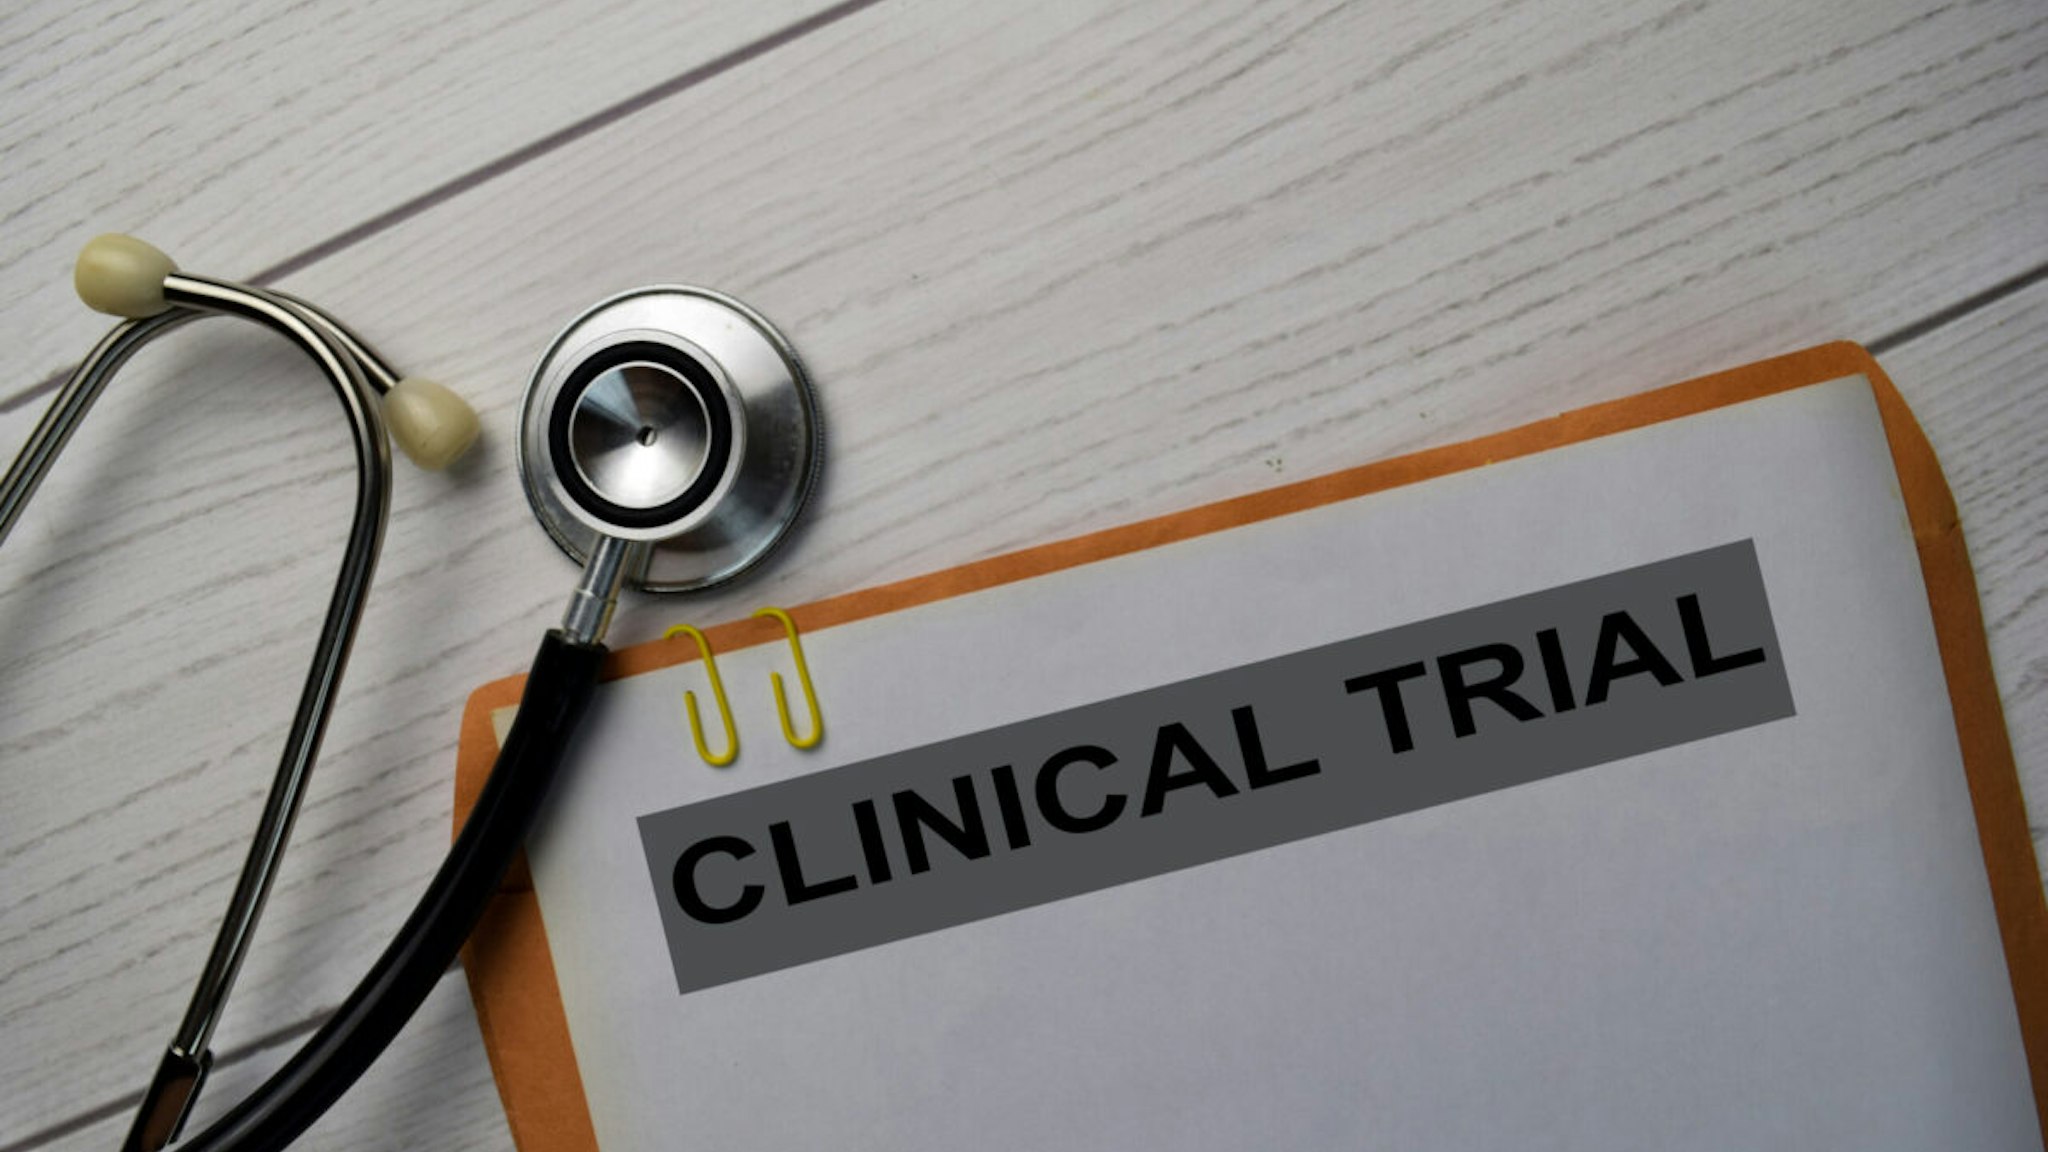 Clinical Trial text with document brown envelope and stethoscope isolated on office desk.